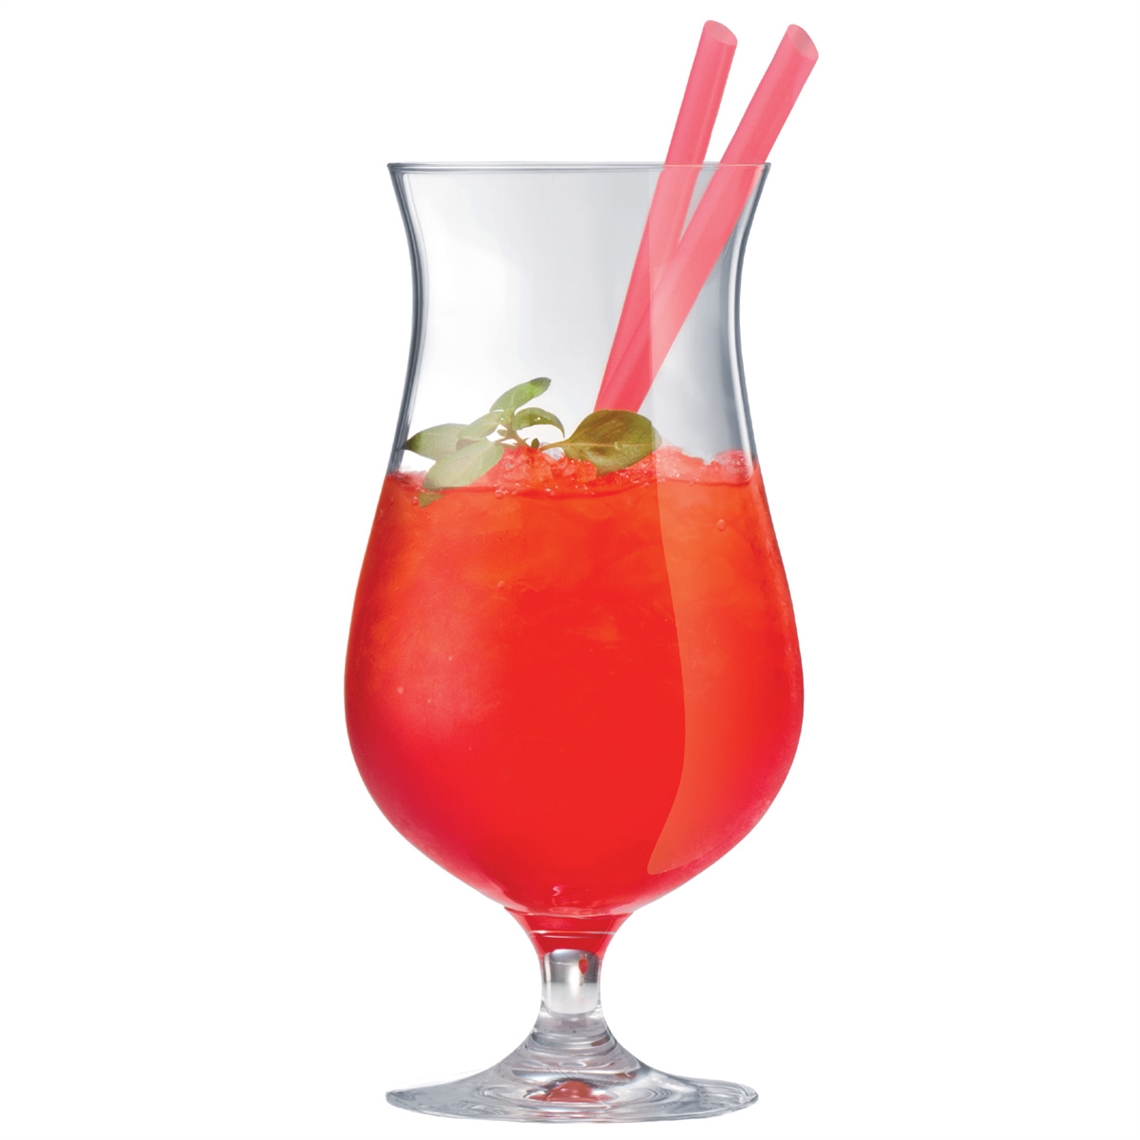 View more ivento from our Cocktail Glasses range